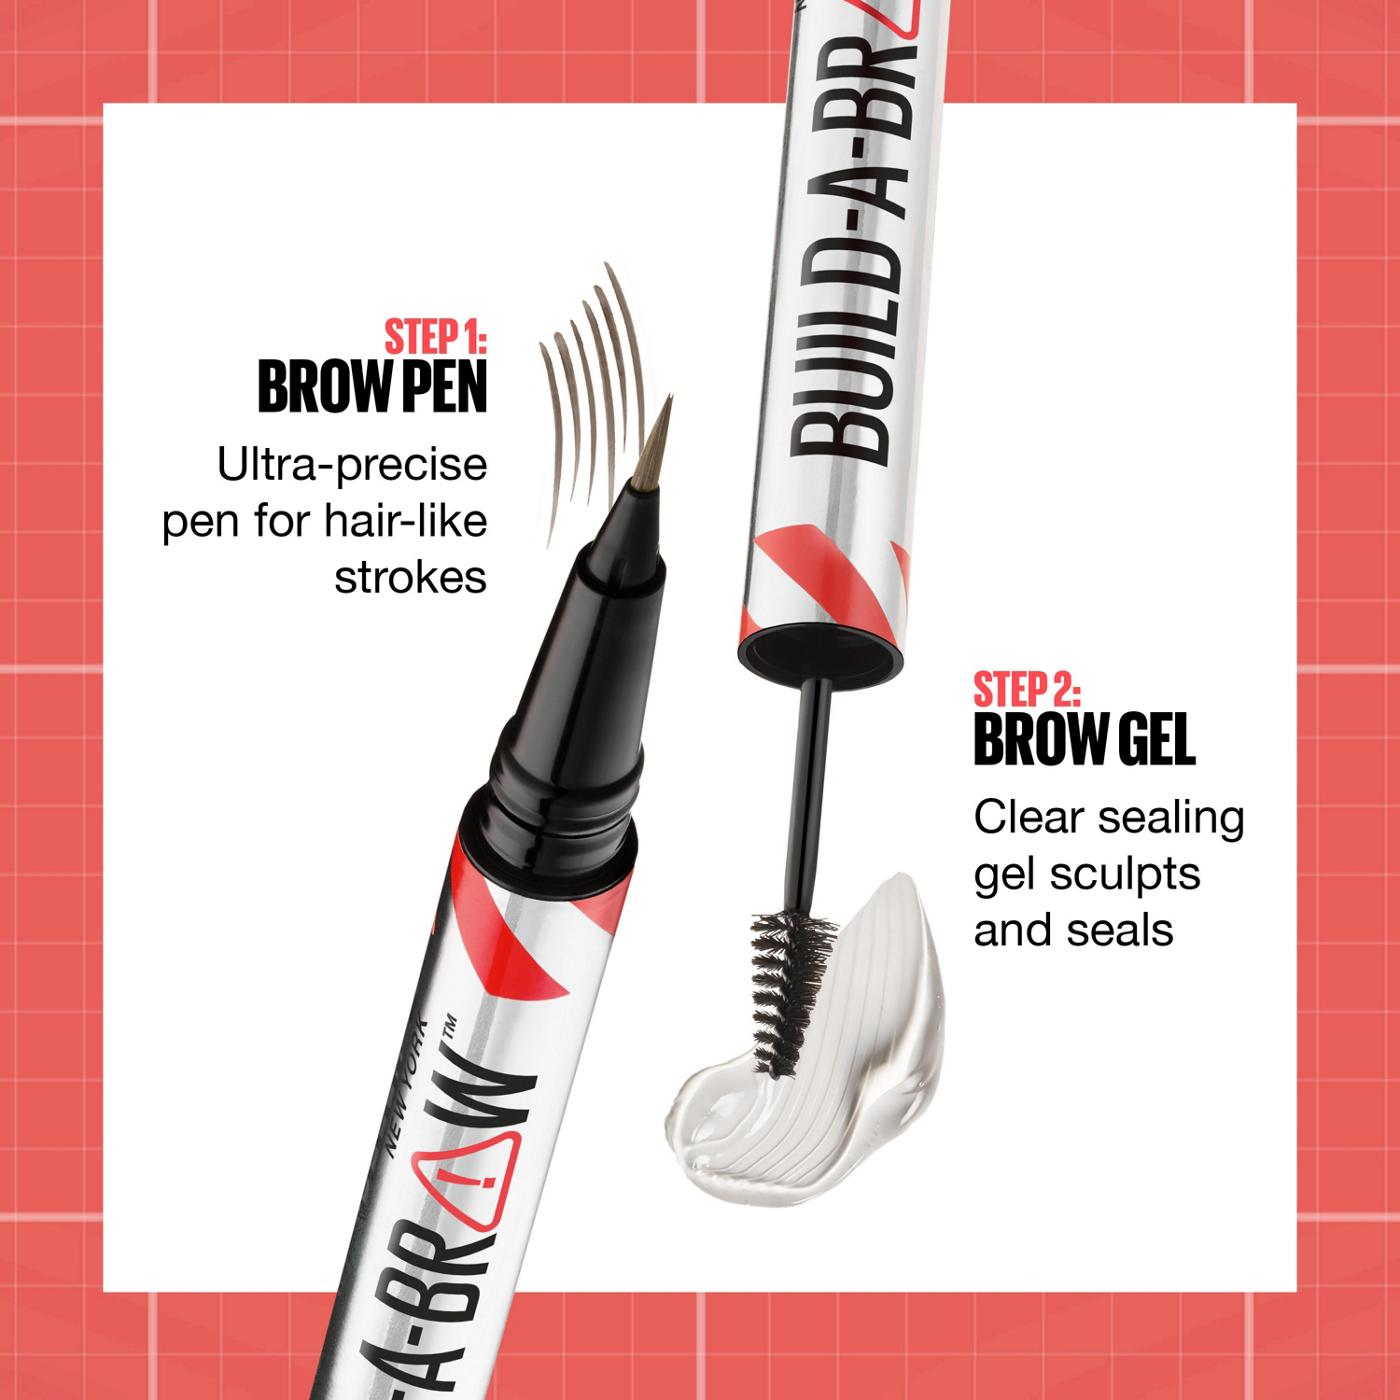 Maybelline Build A Brow 2 In 1 Brow Pen - Ash Brown; image 15 of 17